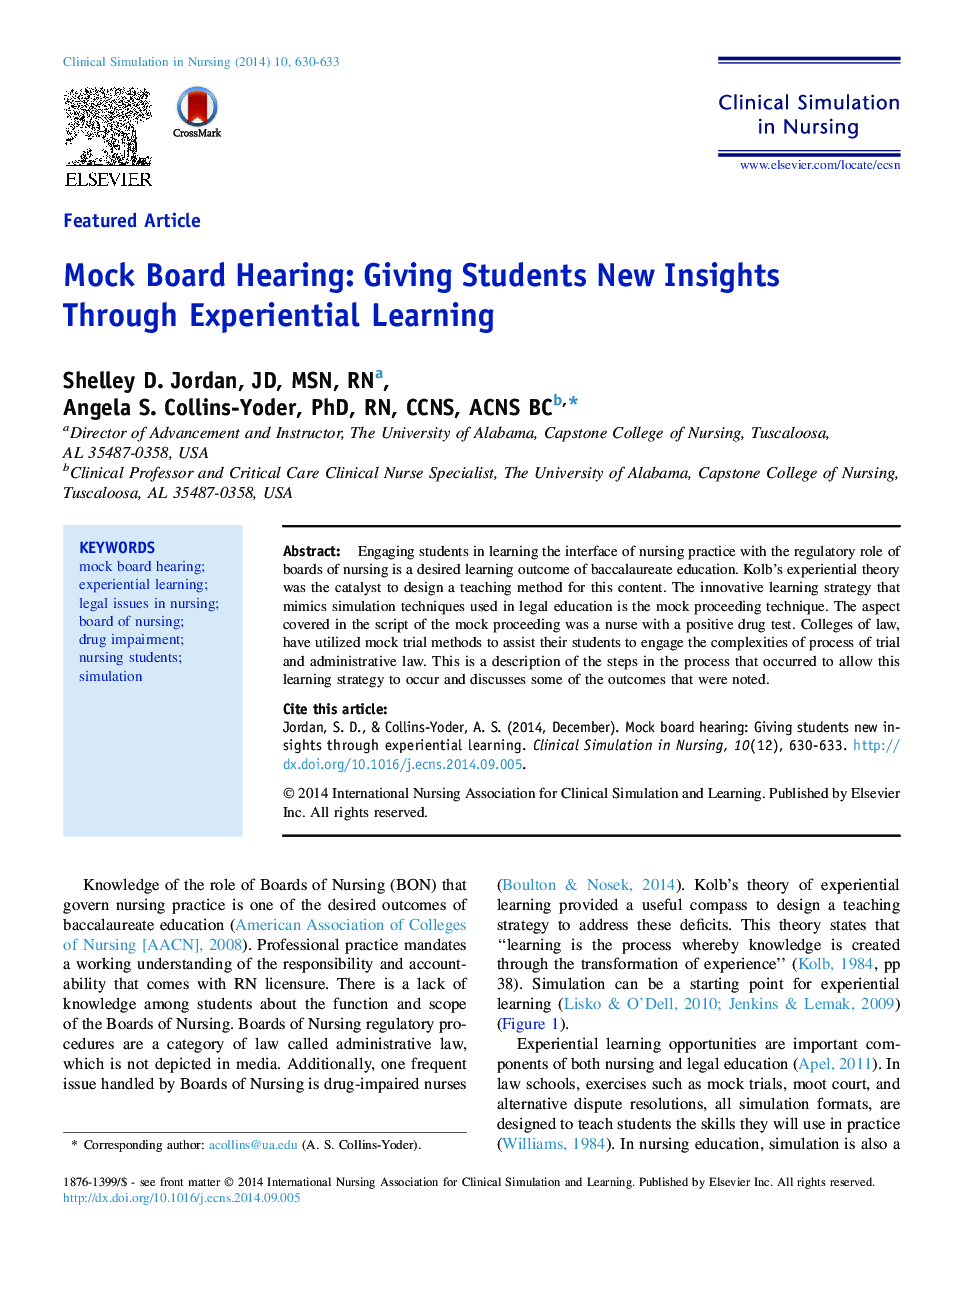 Mock Board Hearing: Giving Students New Insights Through Experiential Learning